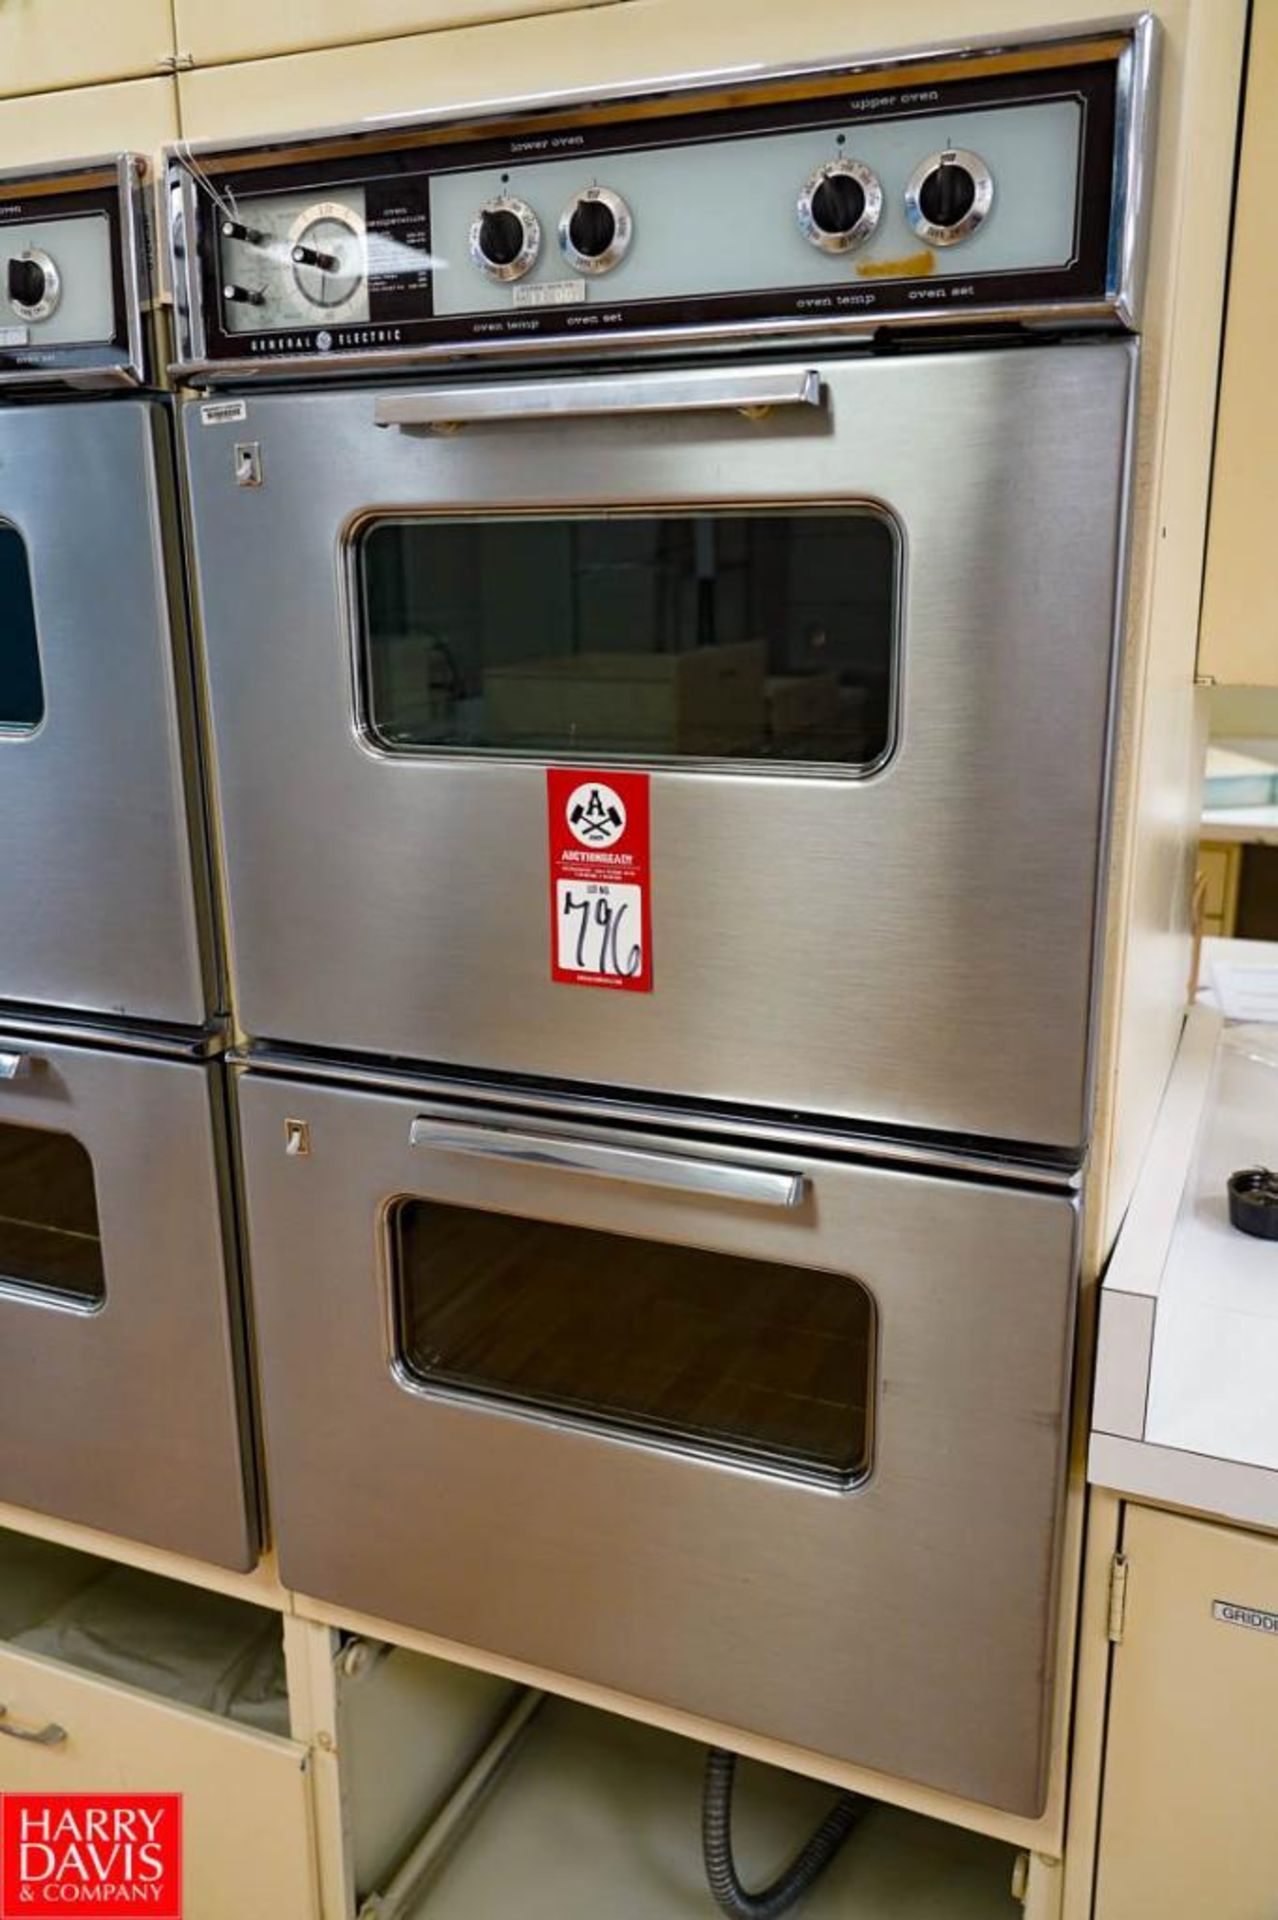 General Electric Double Oven 26'' x 27'' x 87'' Tall, Max Temp 500 and Broil - Rigging Fee: $100 - Image 5 of 6